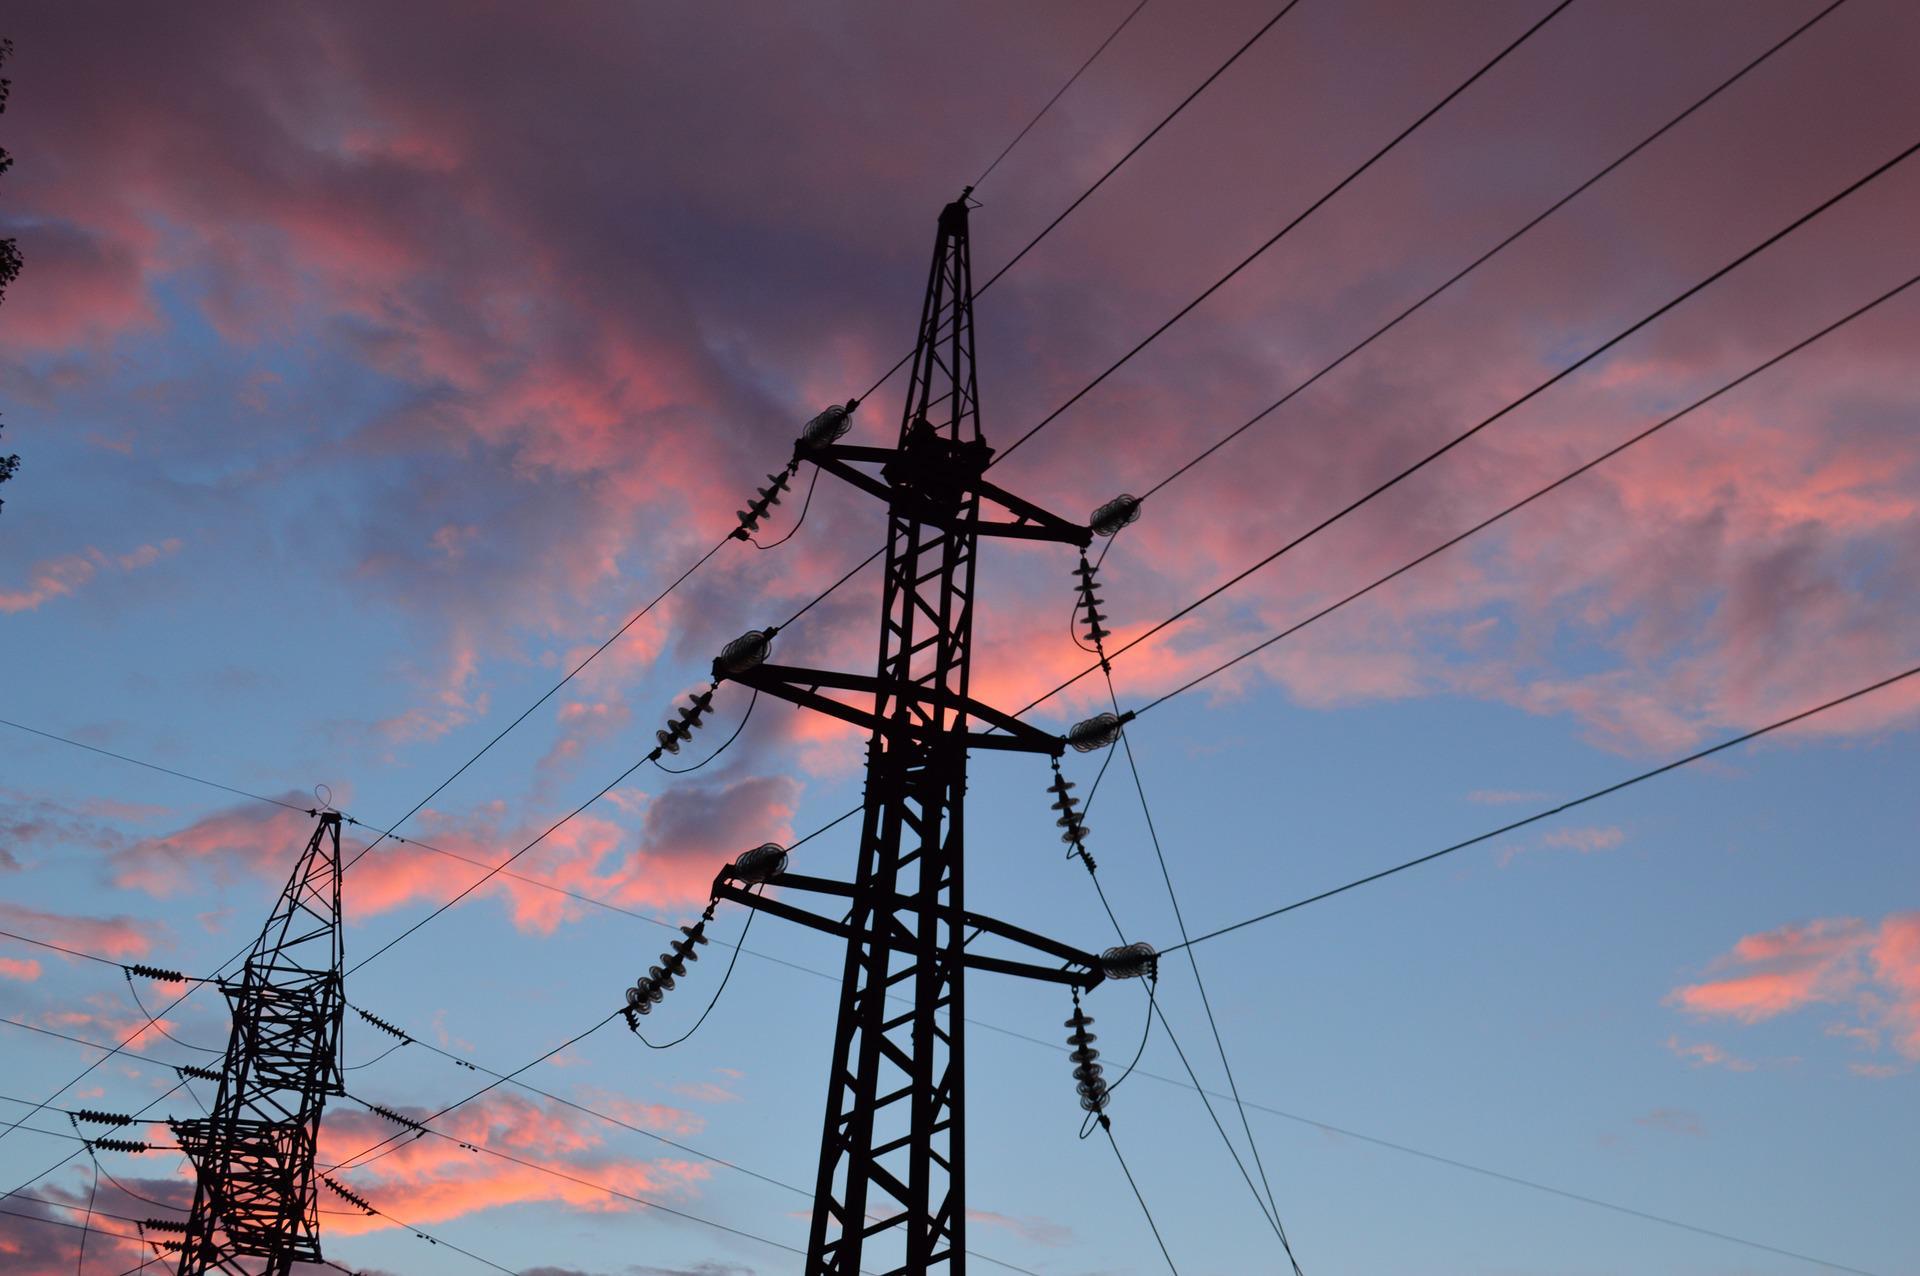 Overhead power line, Electrical wiring, Transmission tower, Cloud, Sky, Atmosphere, Afterglow, Electricity, Dusk, Tree